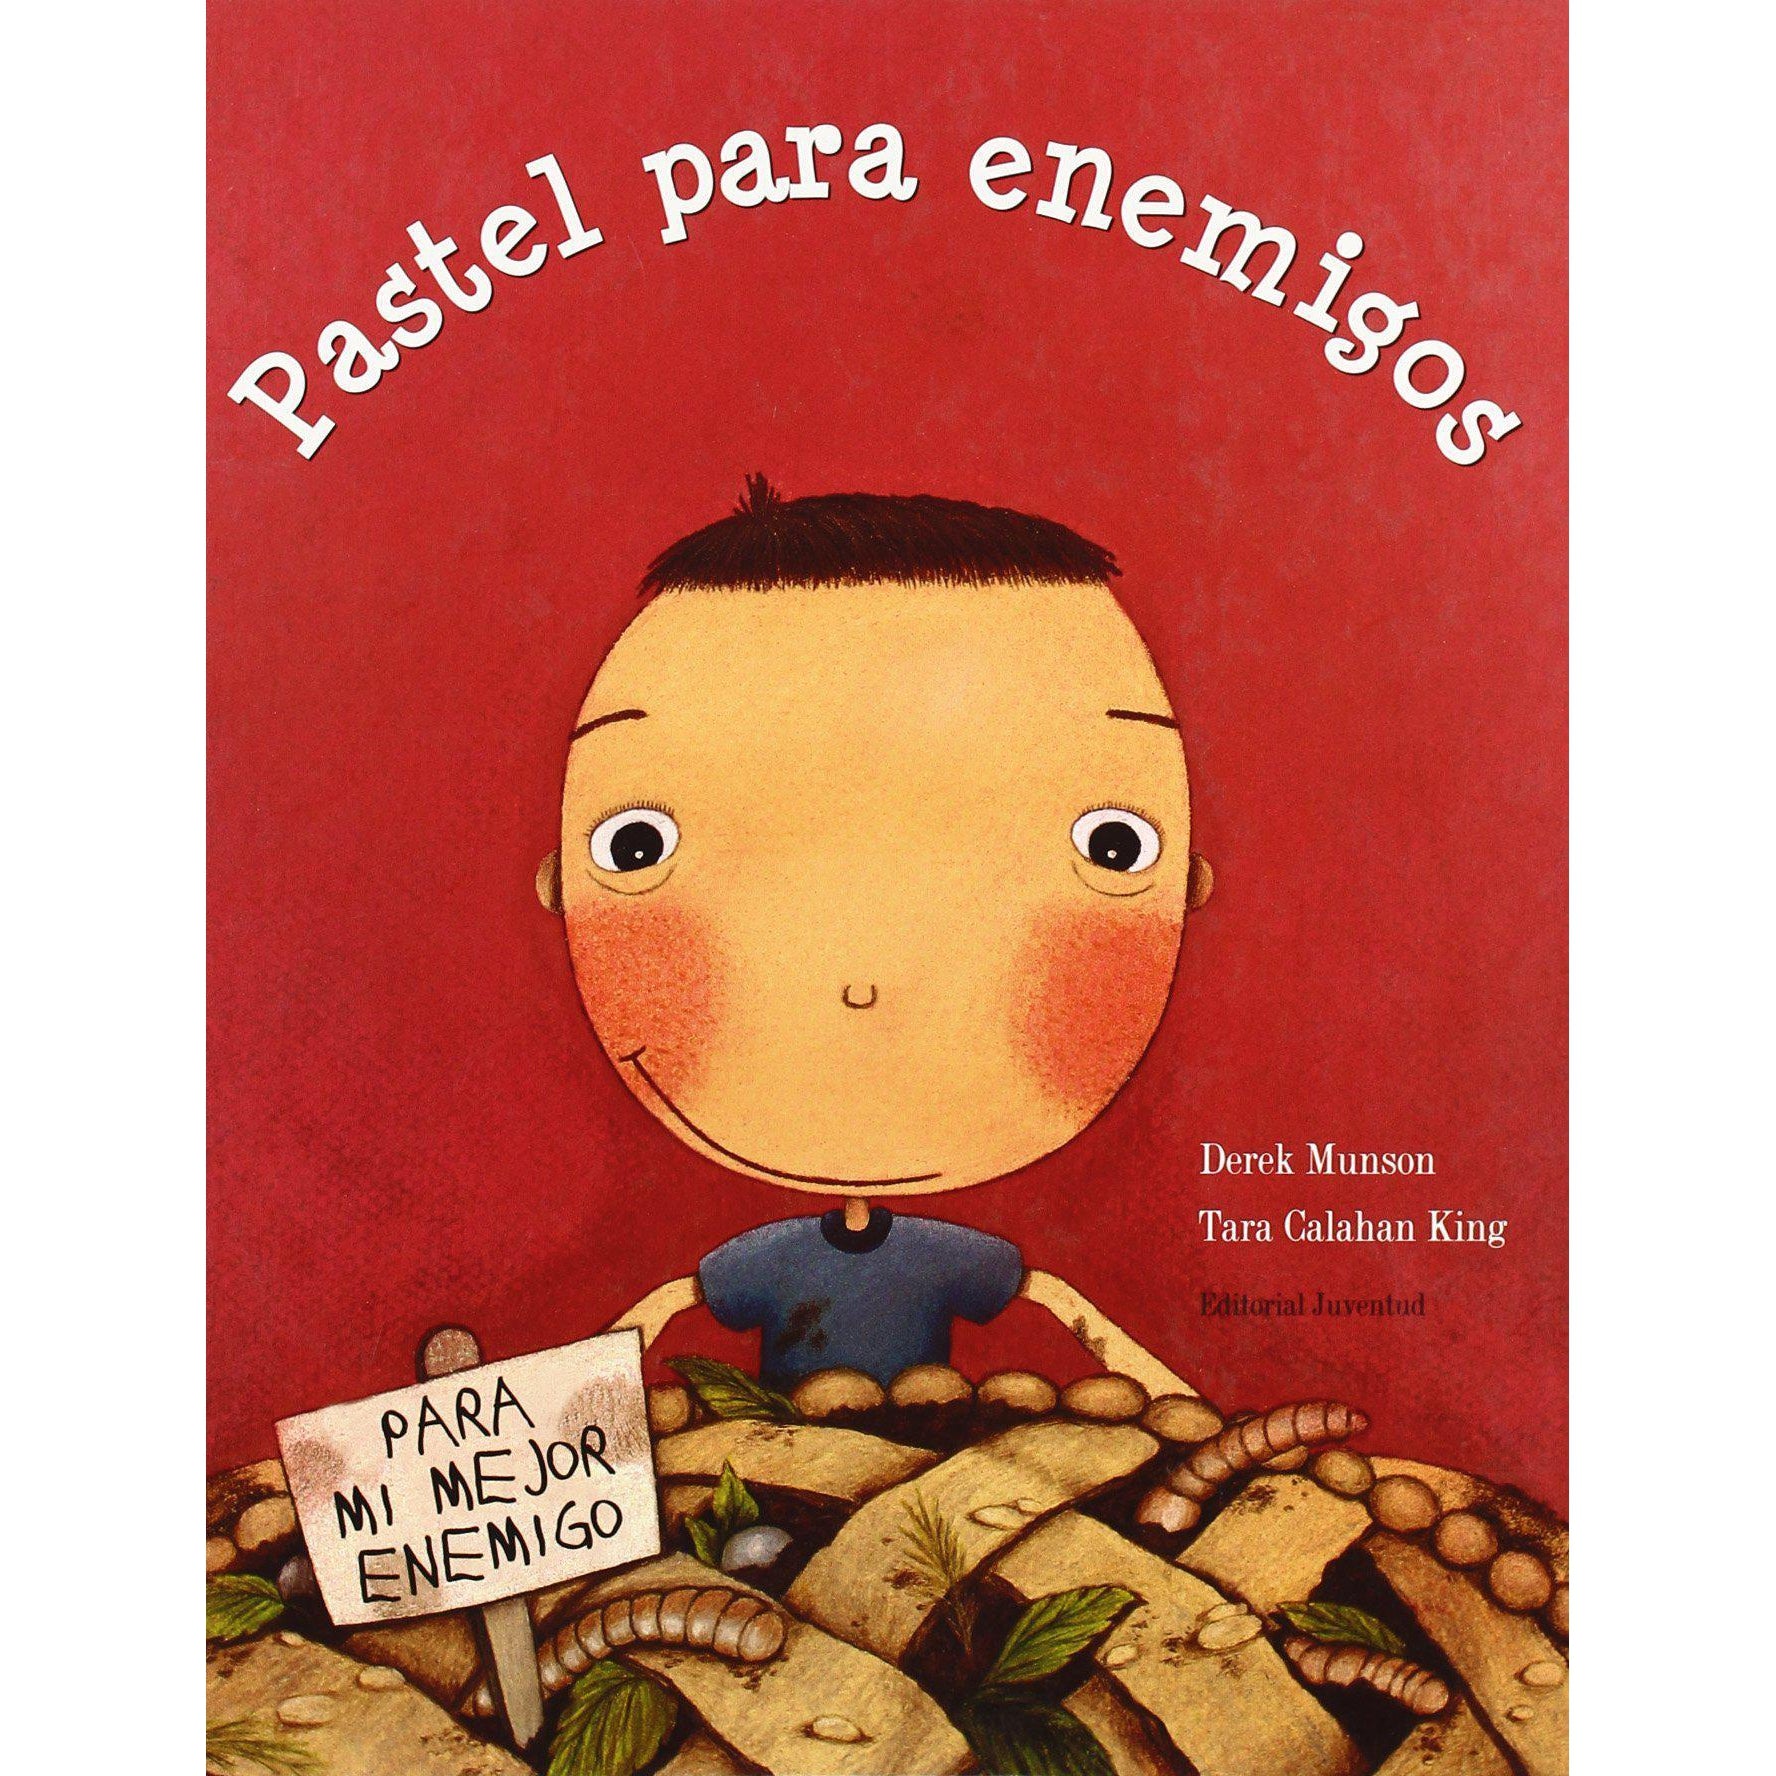 Pastel Para Eemigos [Enemy Pie] | Munson & King - Spanish Edition-The Arts-Chronicle | Hachette-Yellow Springs Toy Company